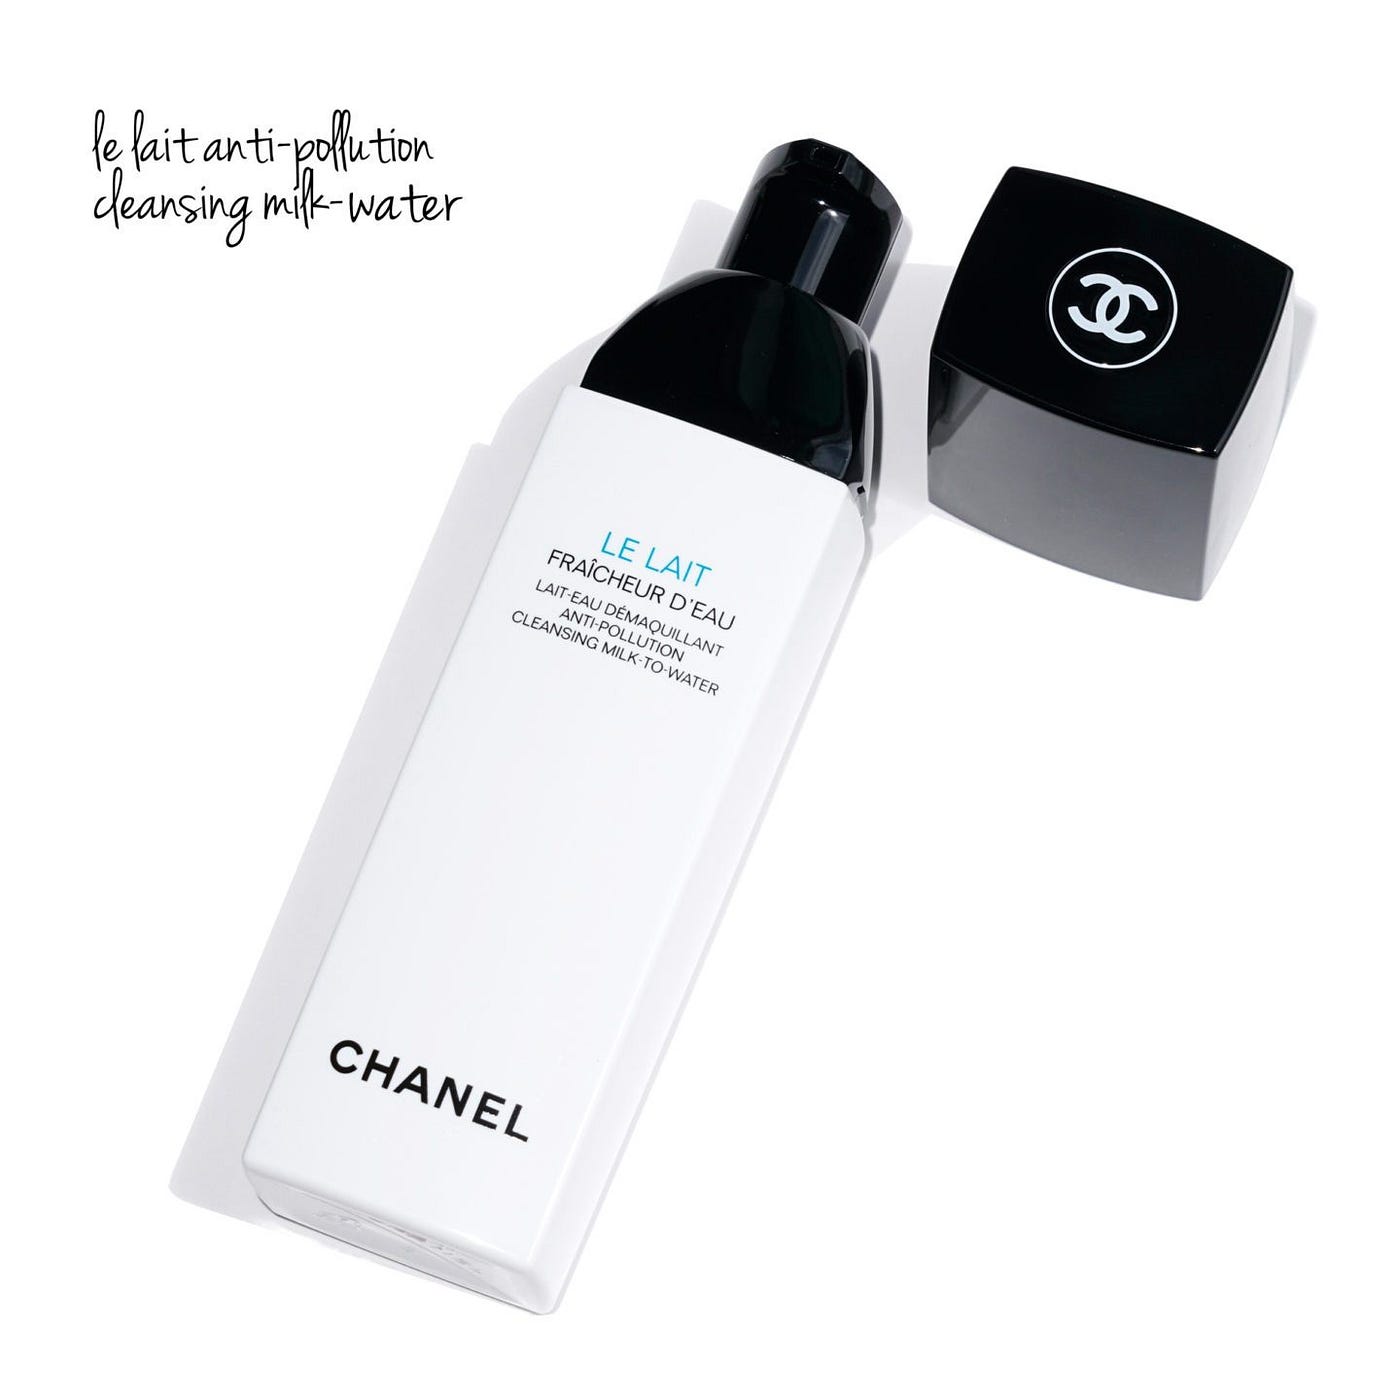 Chanel Cleansing Collection Review, The Beauty Look Book